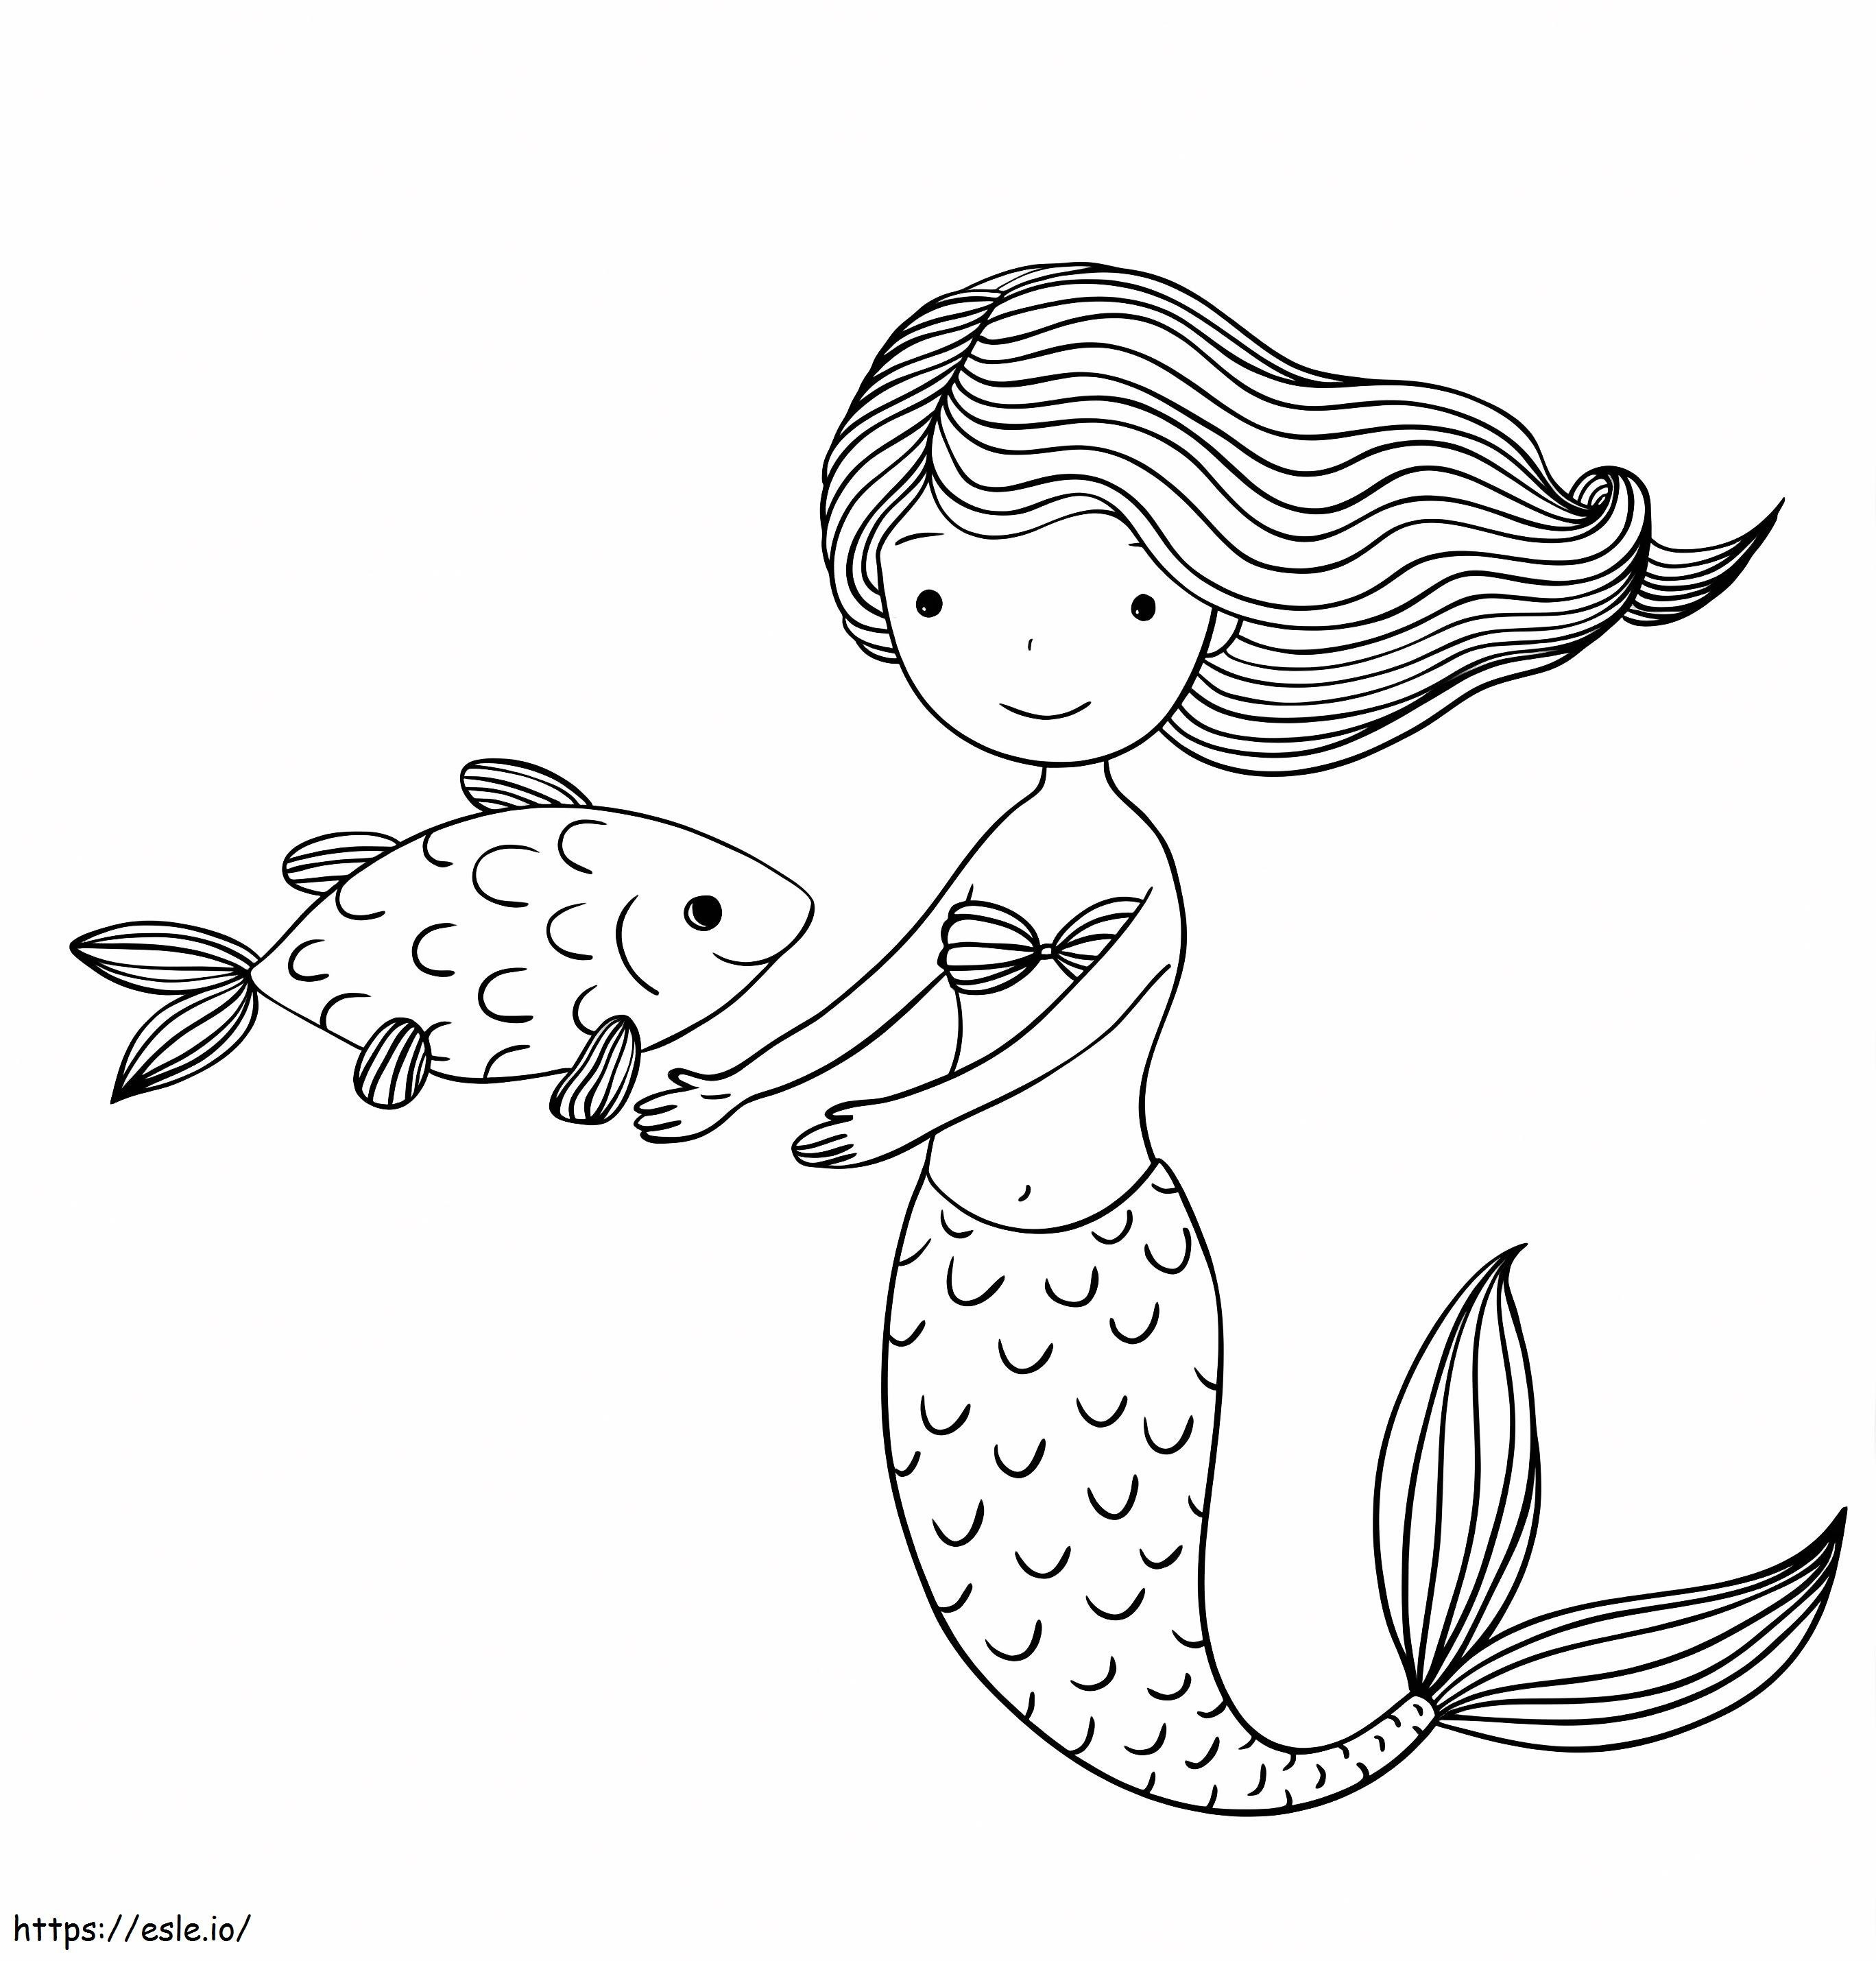 Cute Mermaid And Fish coloring page